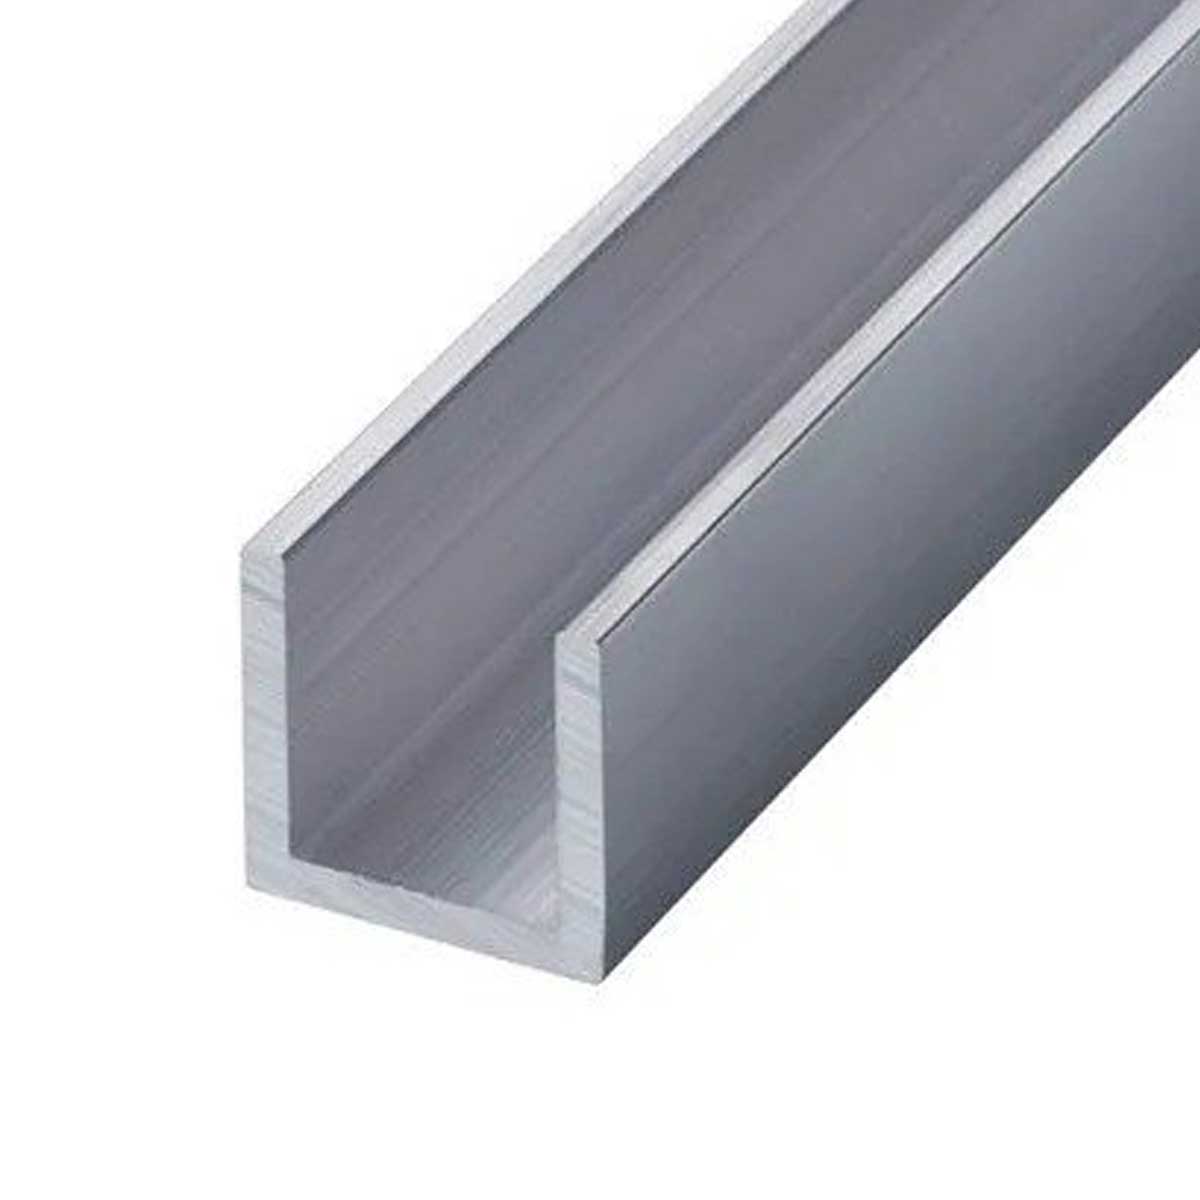 Aluminium C Channel For Construction Manufacturers, Suppliers in Chitrakoot